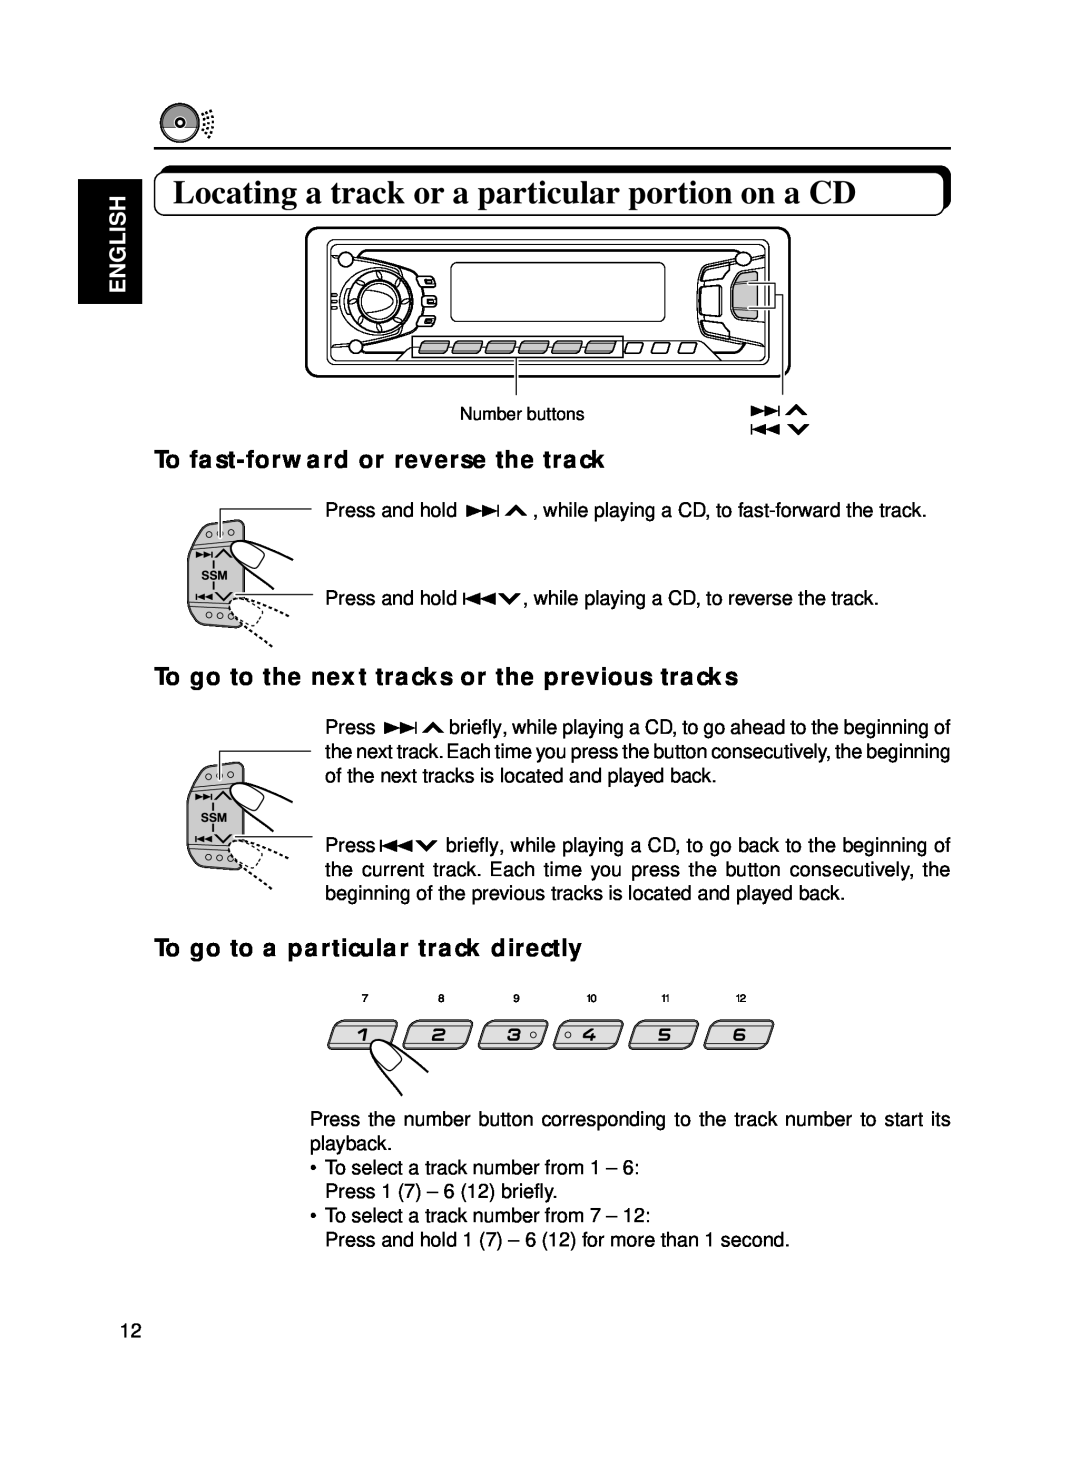 JVC KD-SX770, KD-SX870 manual Locating a track or a particular portion on a CD, To fast-forwardor reverse the track, English 